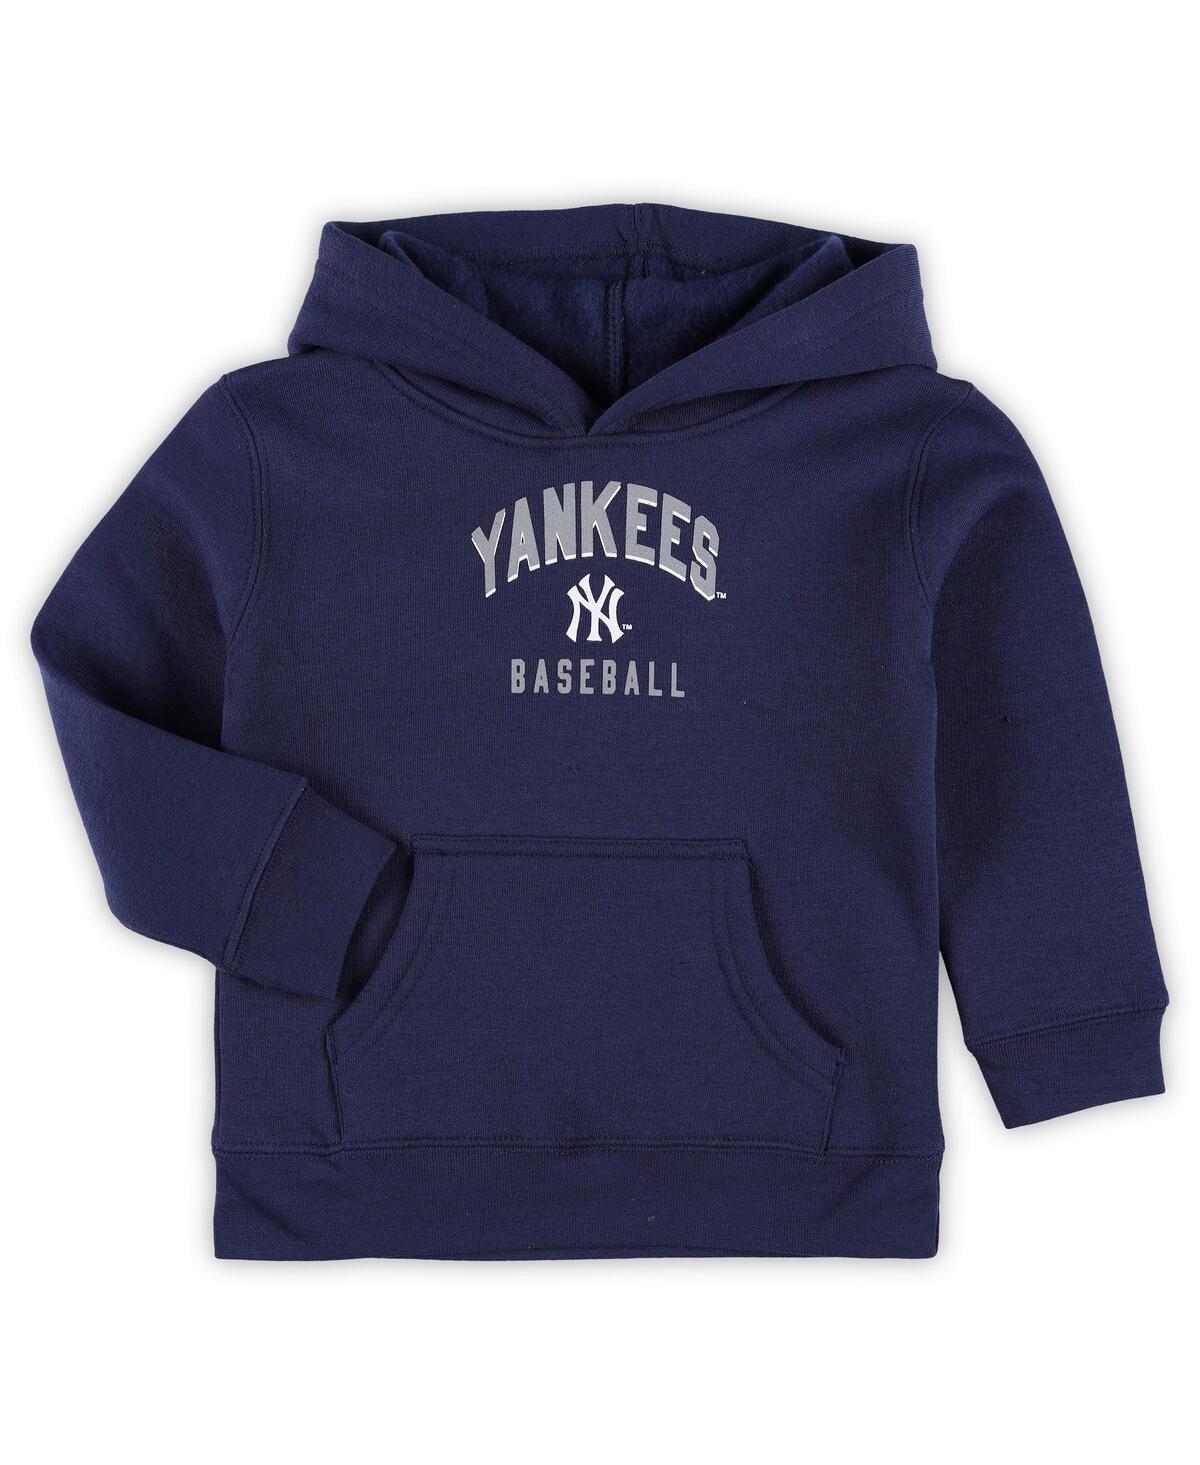 Shop Outerstuff Toddler Boys Navy, Gray New York Yankees Play-by-play Pullover Fleece Hoodie And Pants Set In Navy,gray